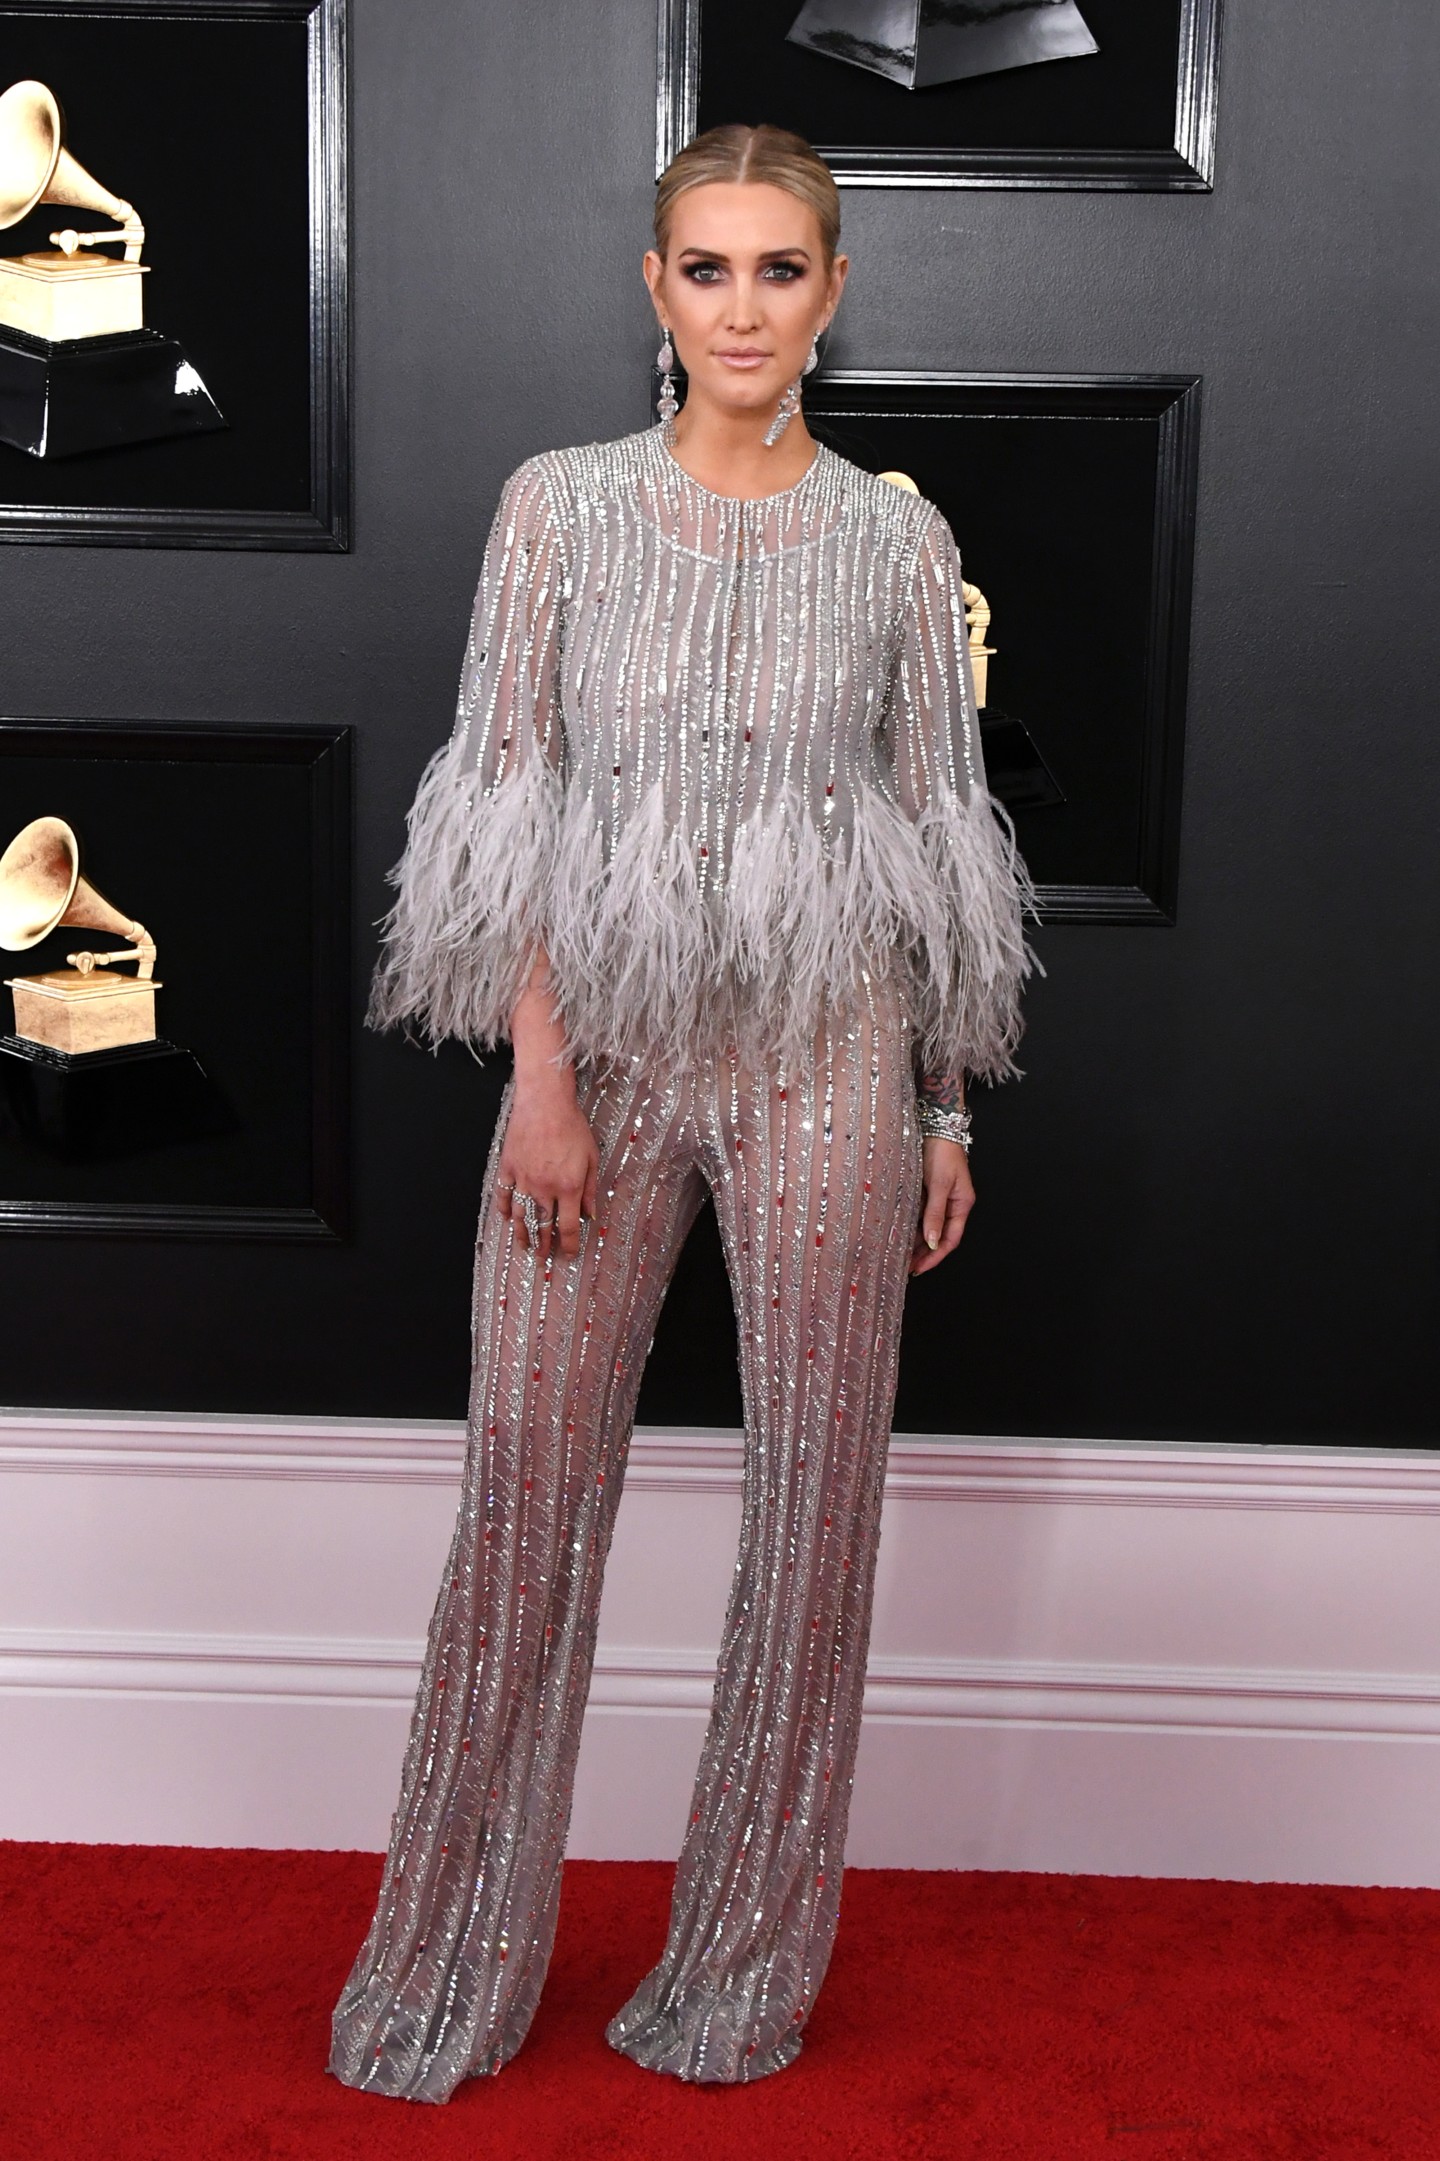 Here are all the looks you need to see from the 2019 Grammys Red Carpet